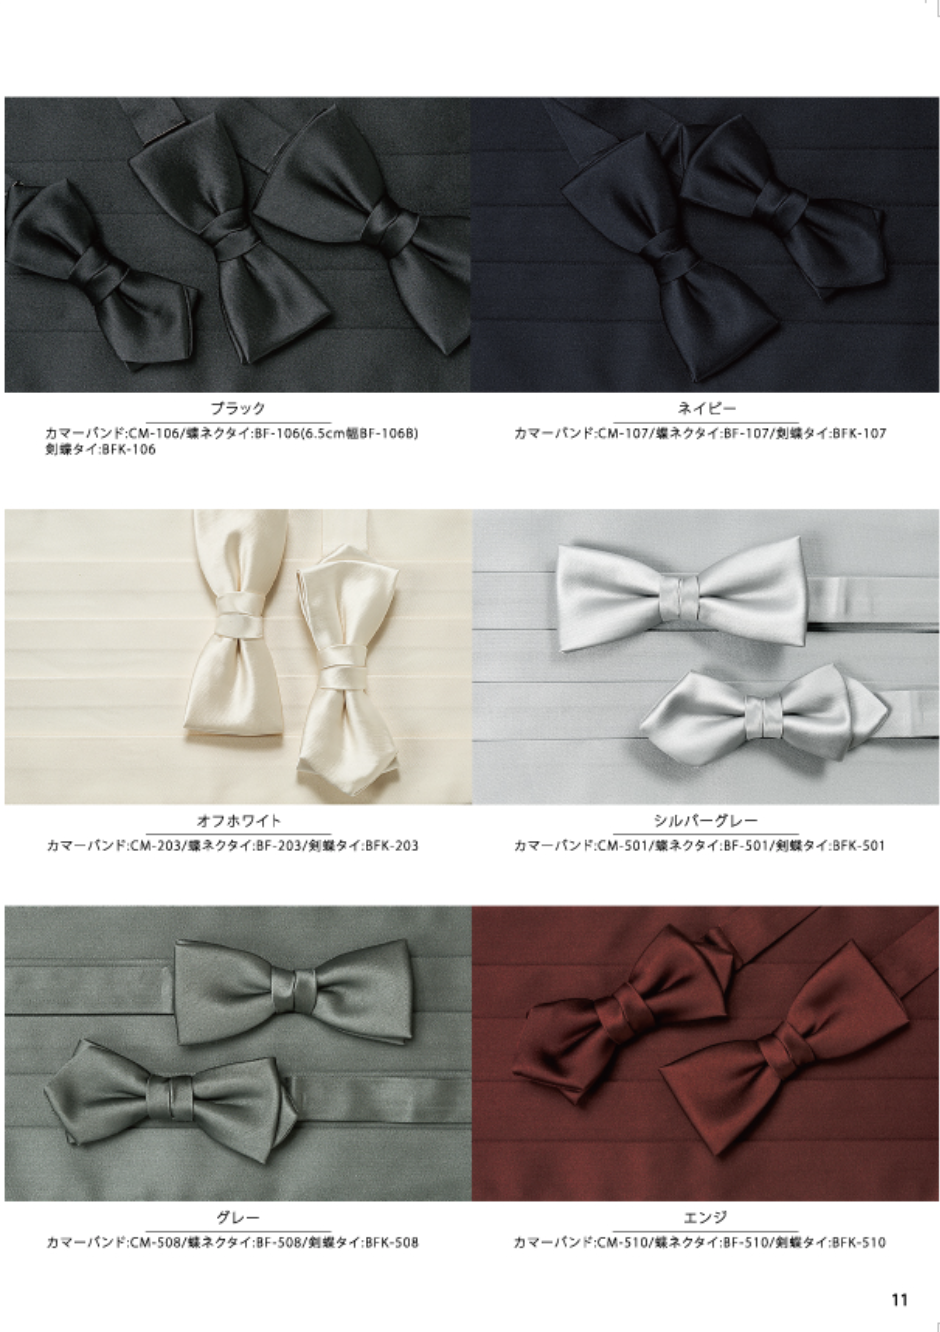 EXCY FORMAL ACCESSORY COLLECTION Vol.8 pg.11